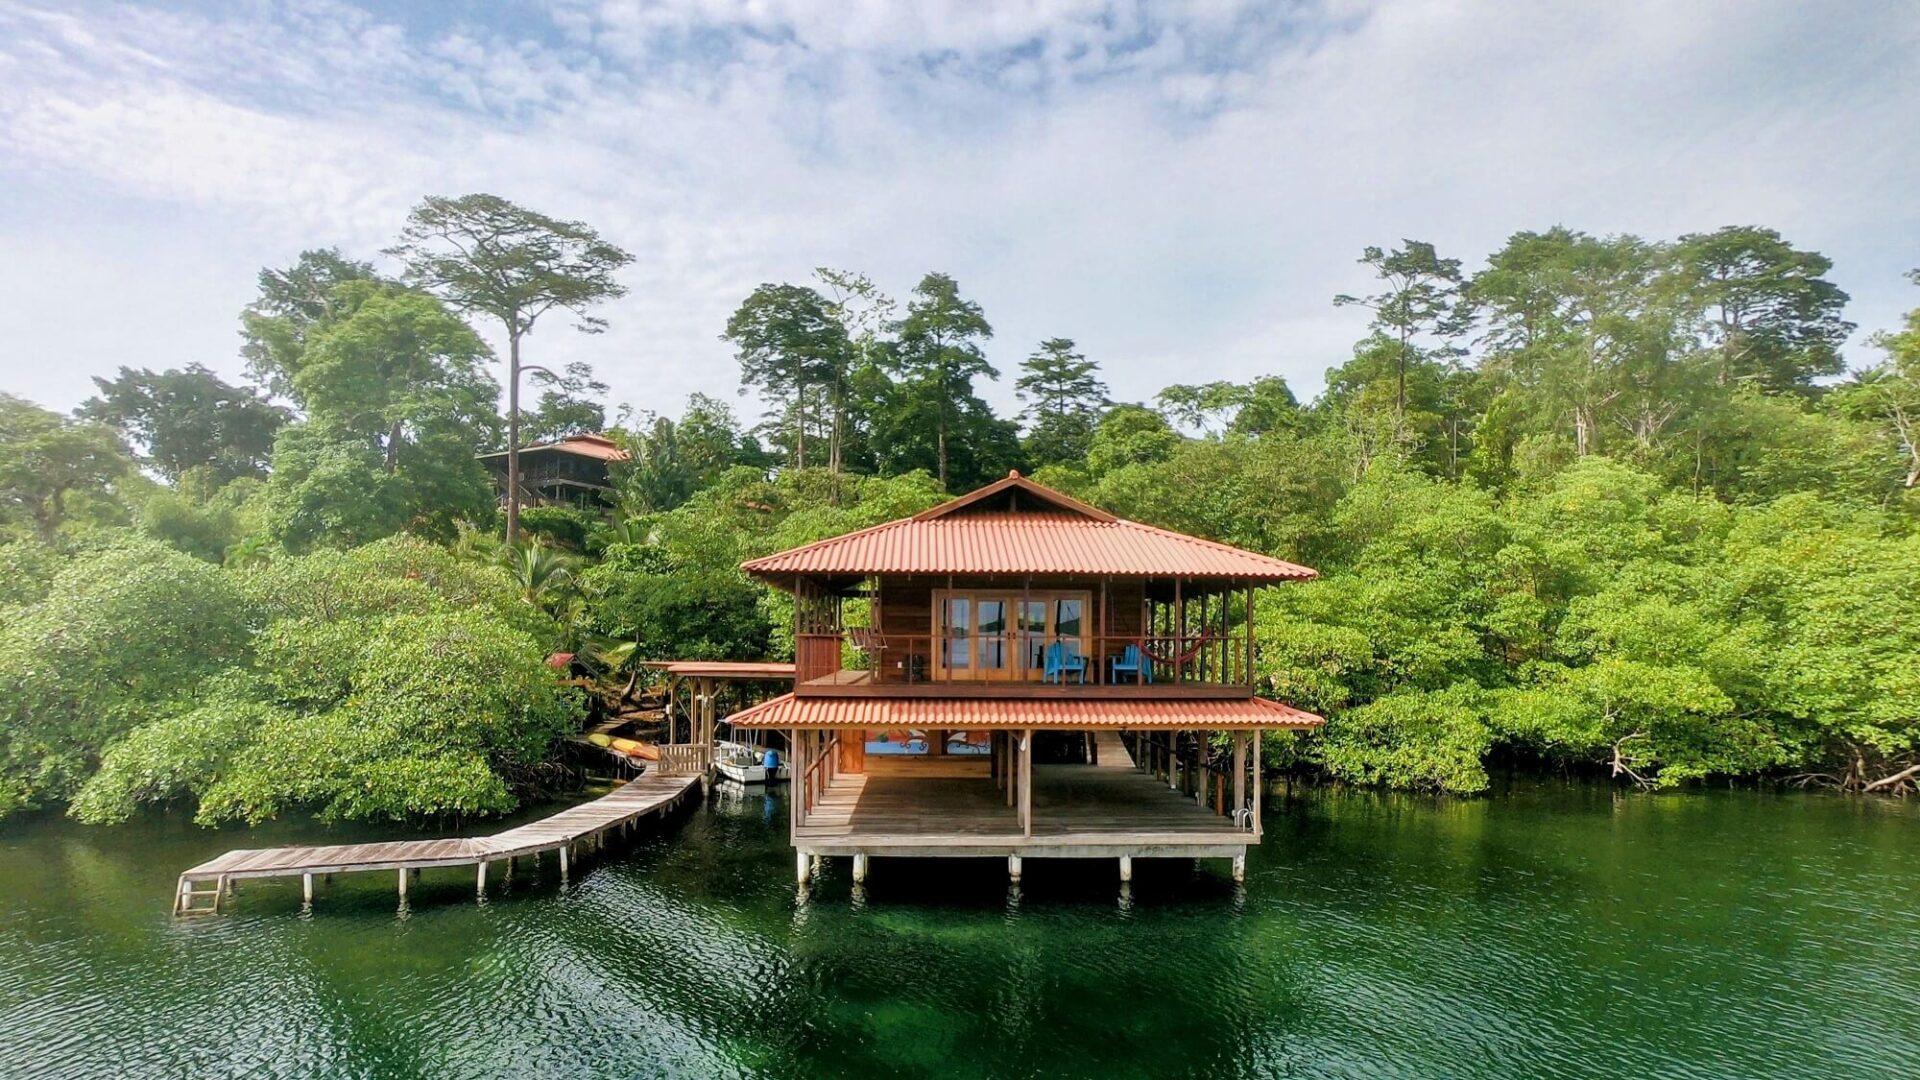 A house on stilts in the middle of a lake.